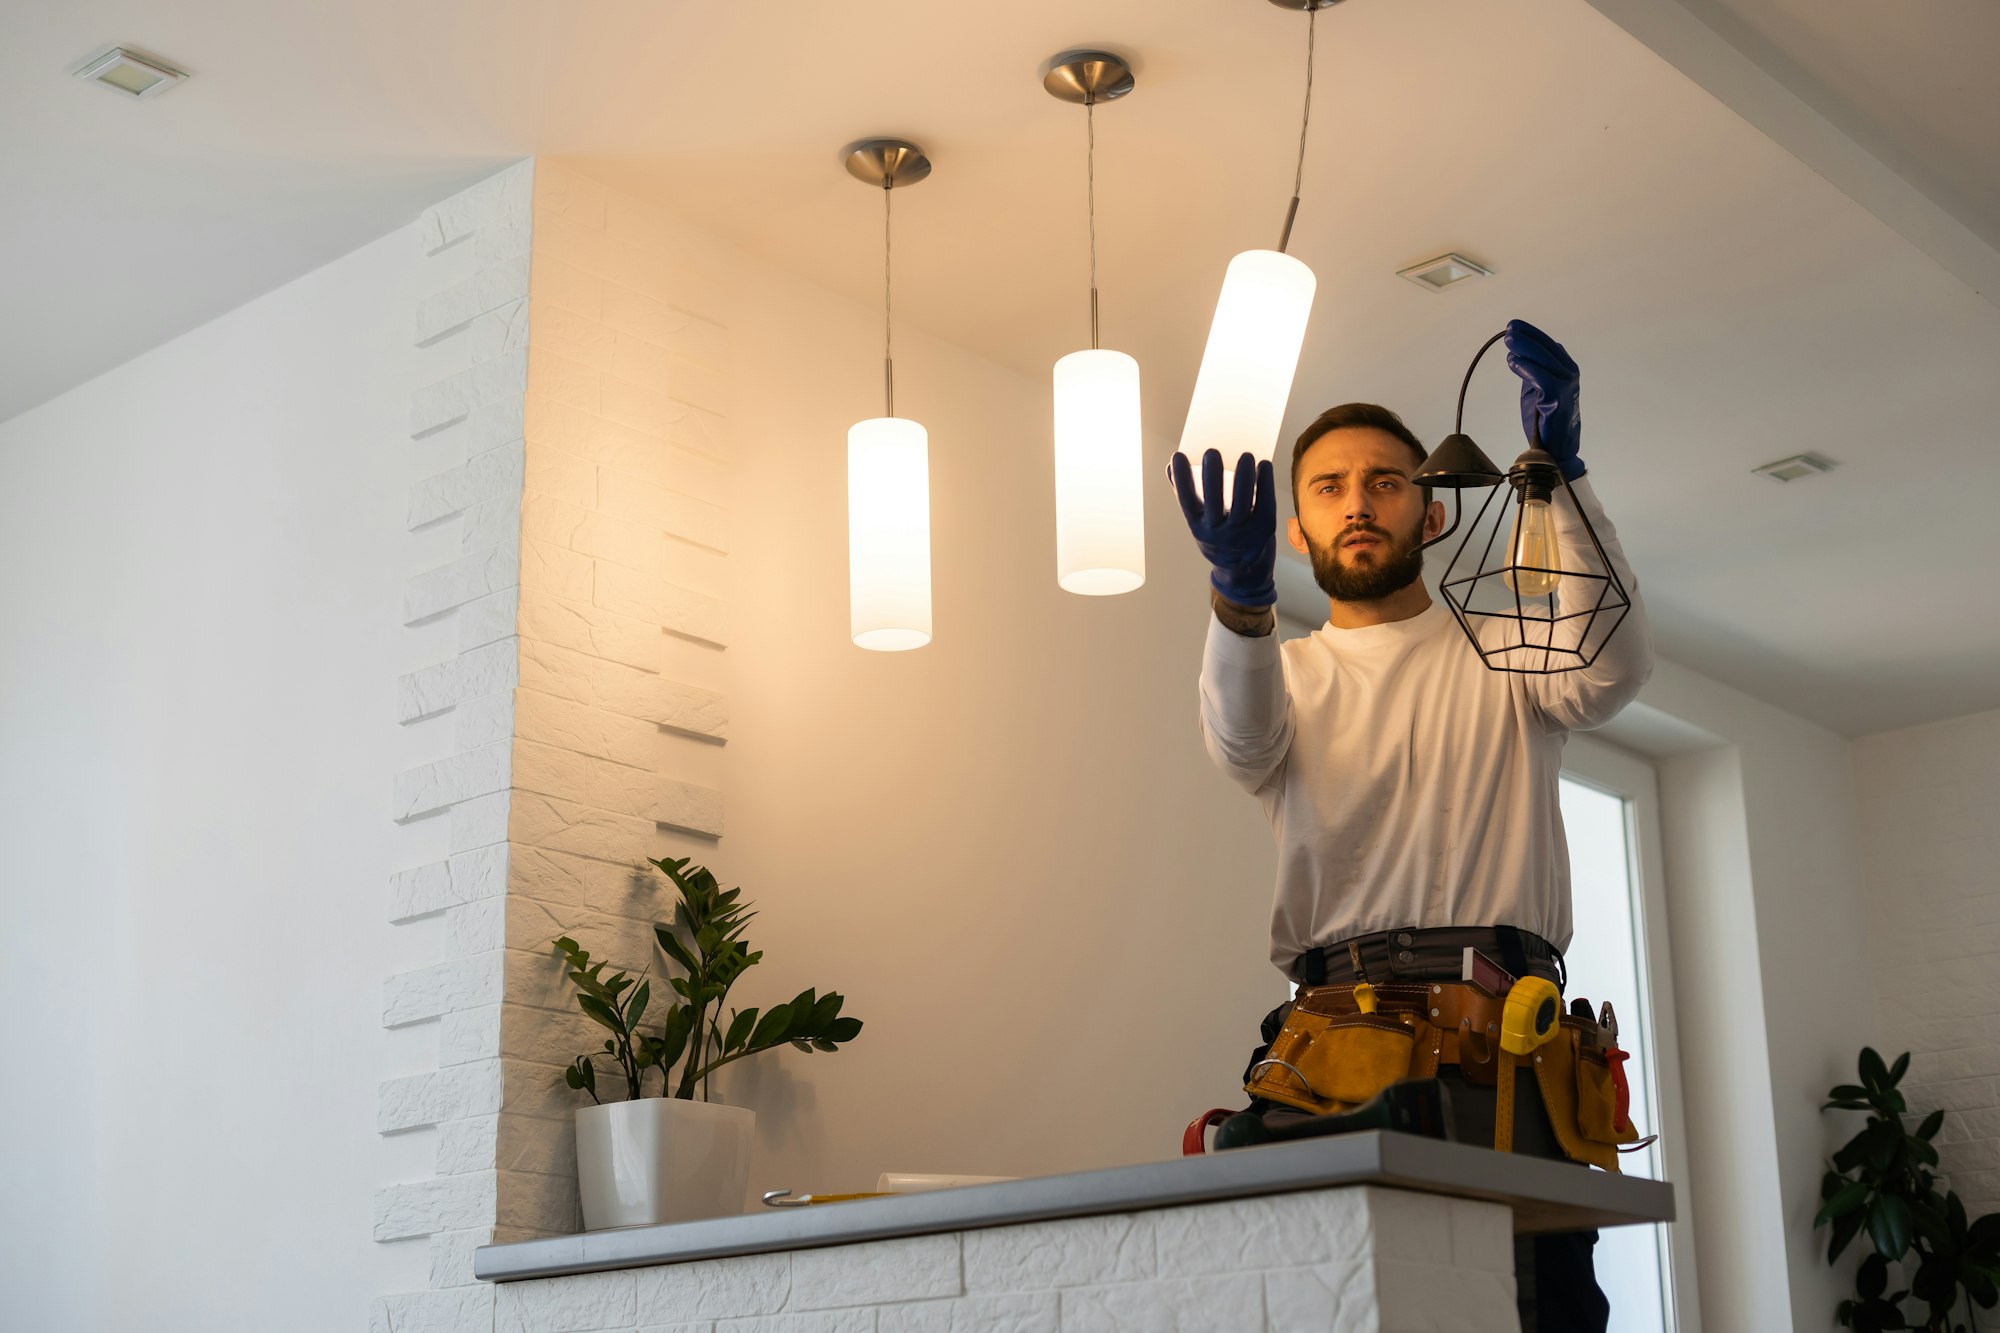 Electrician worker installation electric lamps light inside apartment. Construction decoration